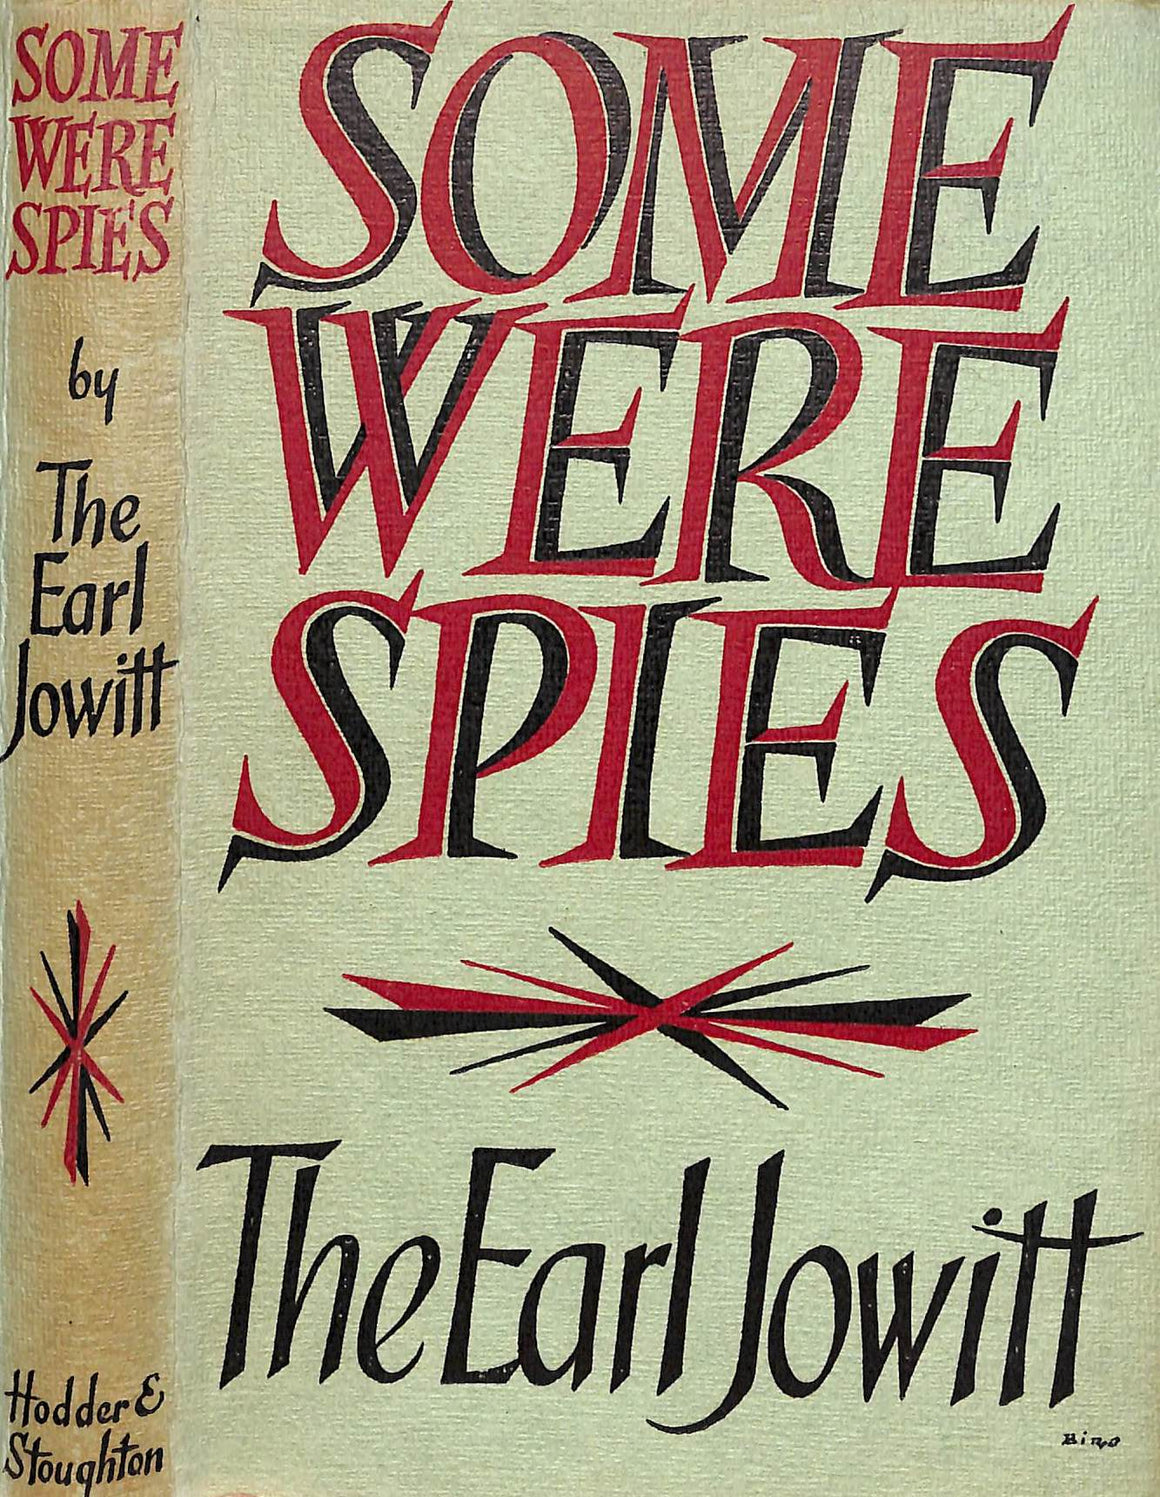 "Some Were Spies" 1955 JOWITT, The Earl